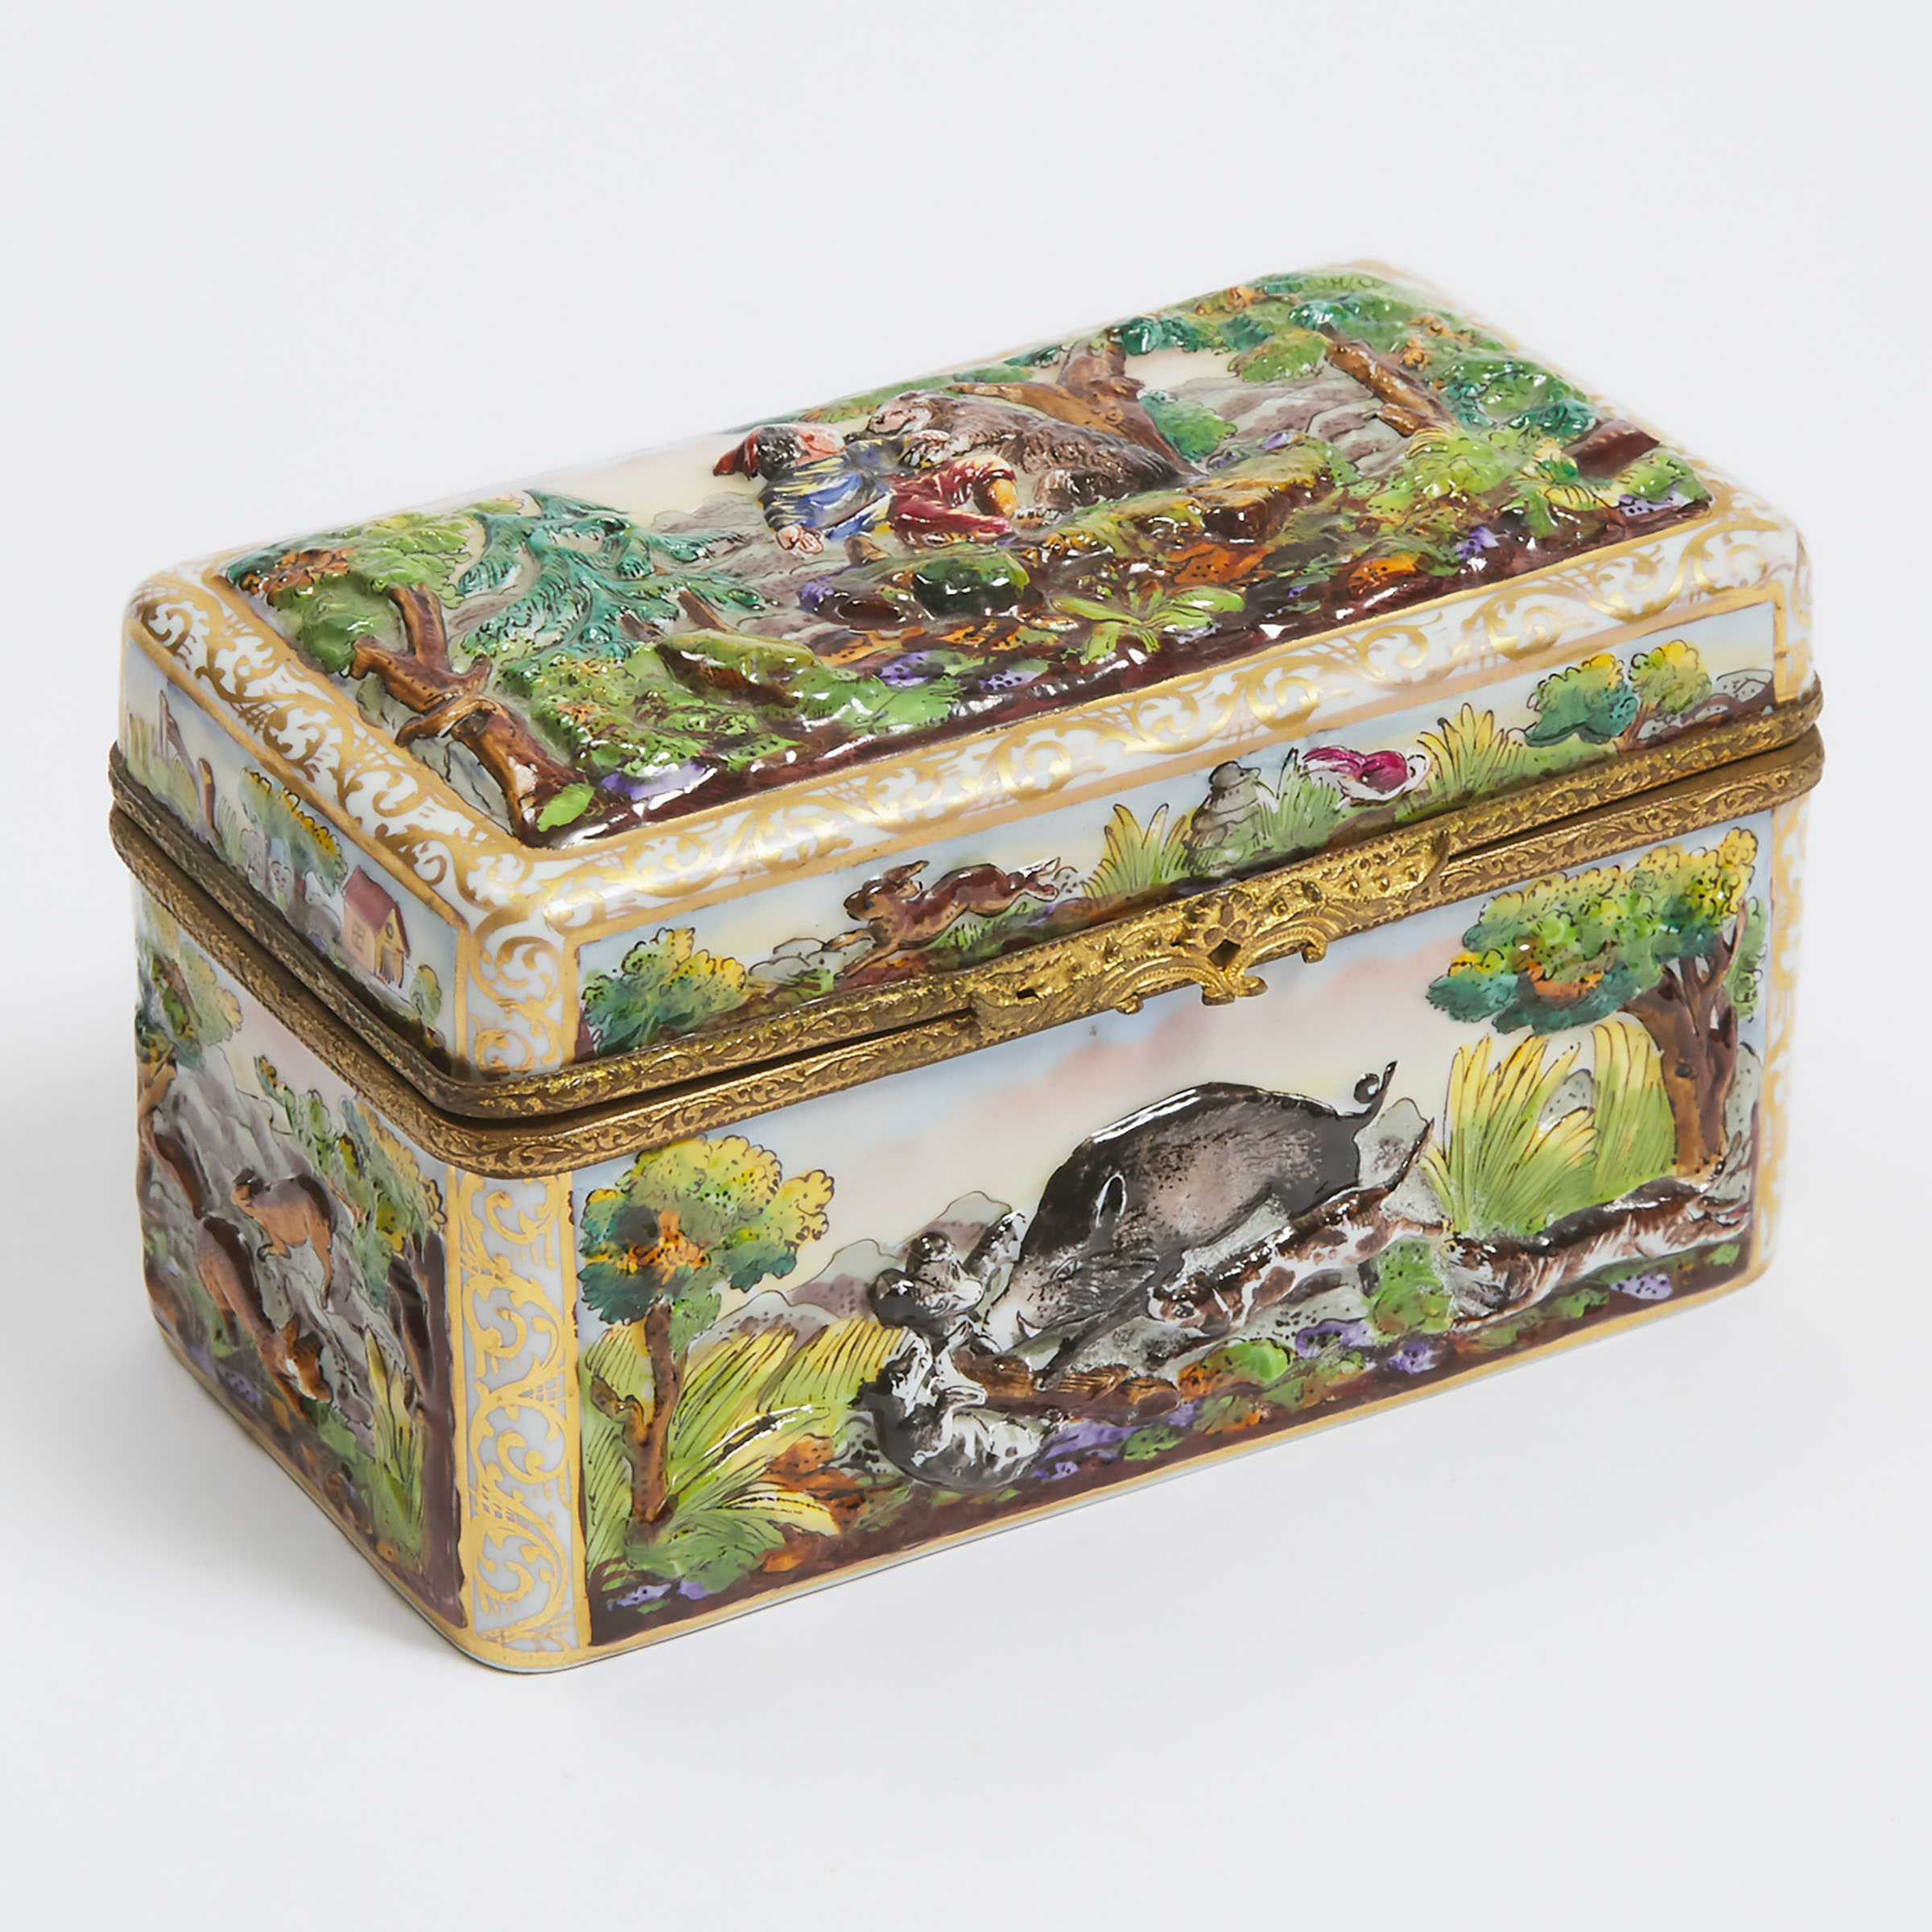 'Naples' Rectangular Small Casket, late 19th/early 20th century